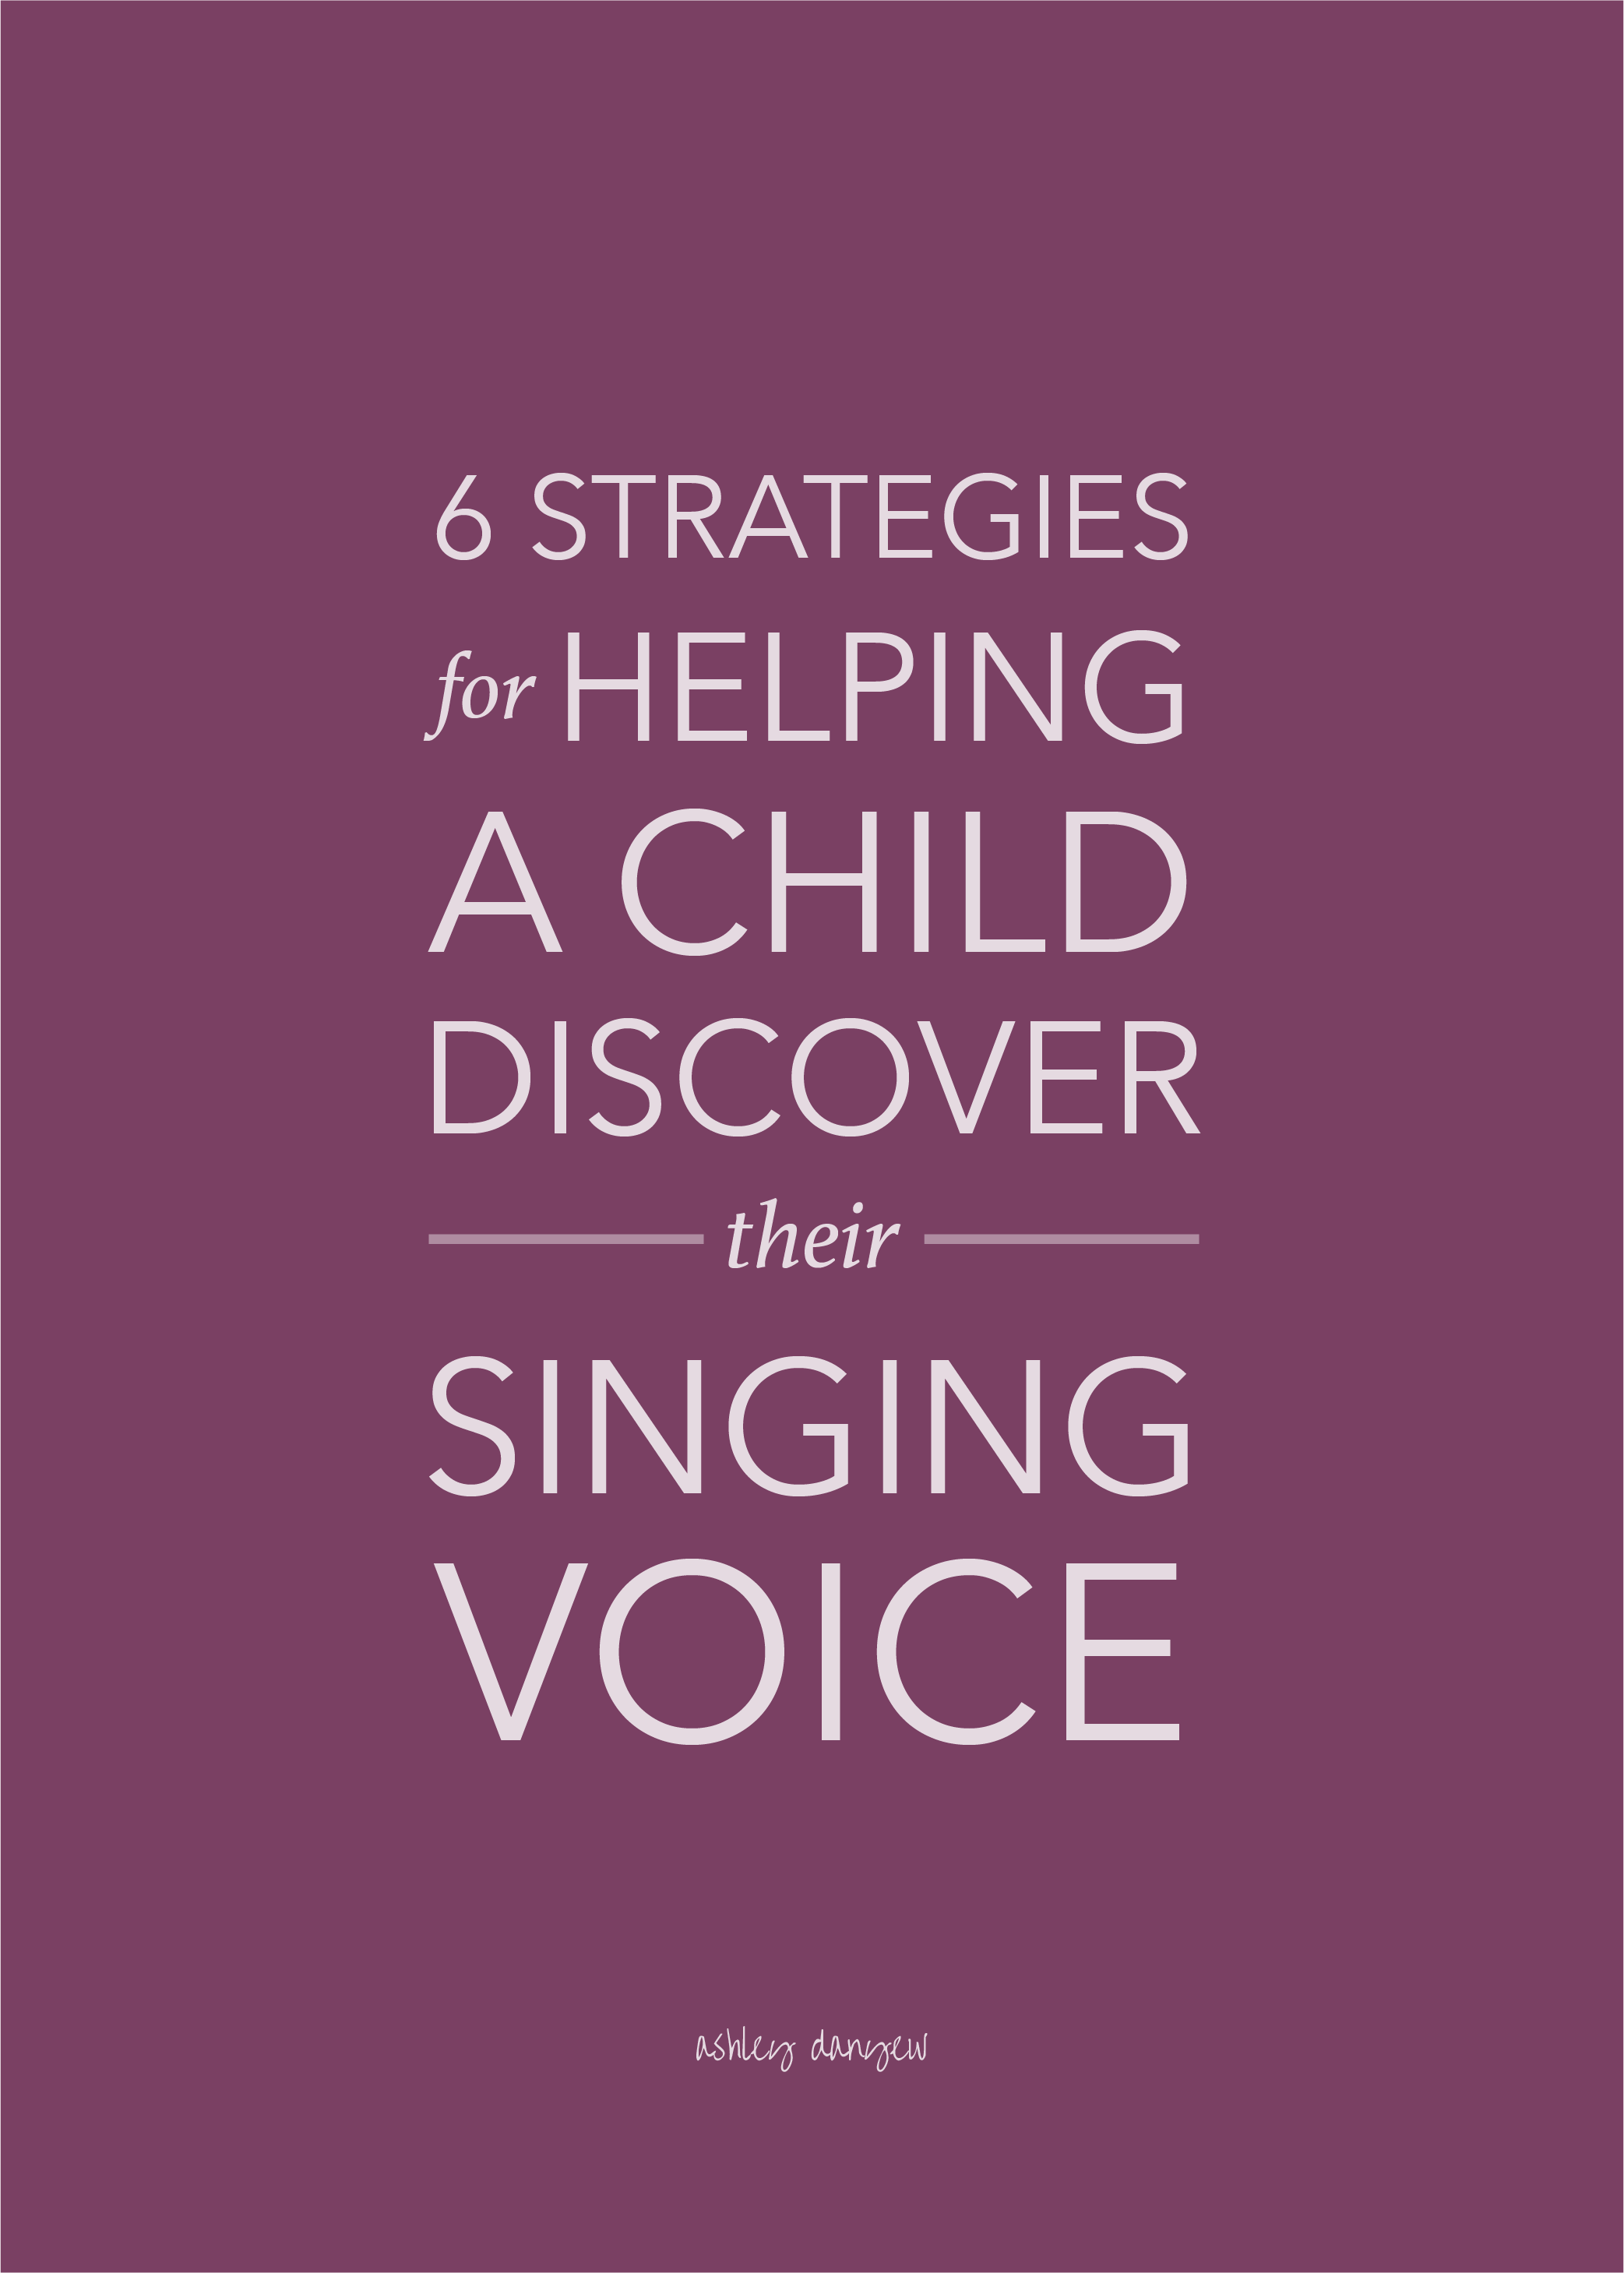 Copy of 6 Strategies for Helping a Child Discover Their Singing Voice